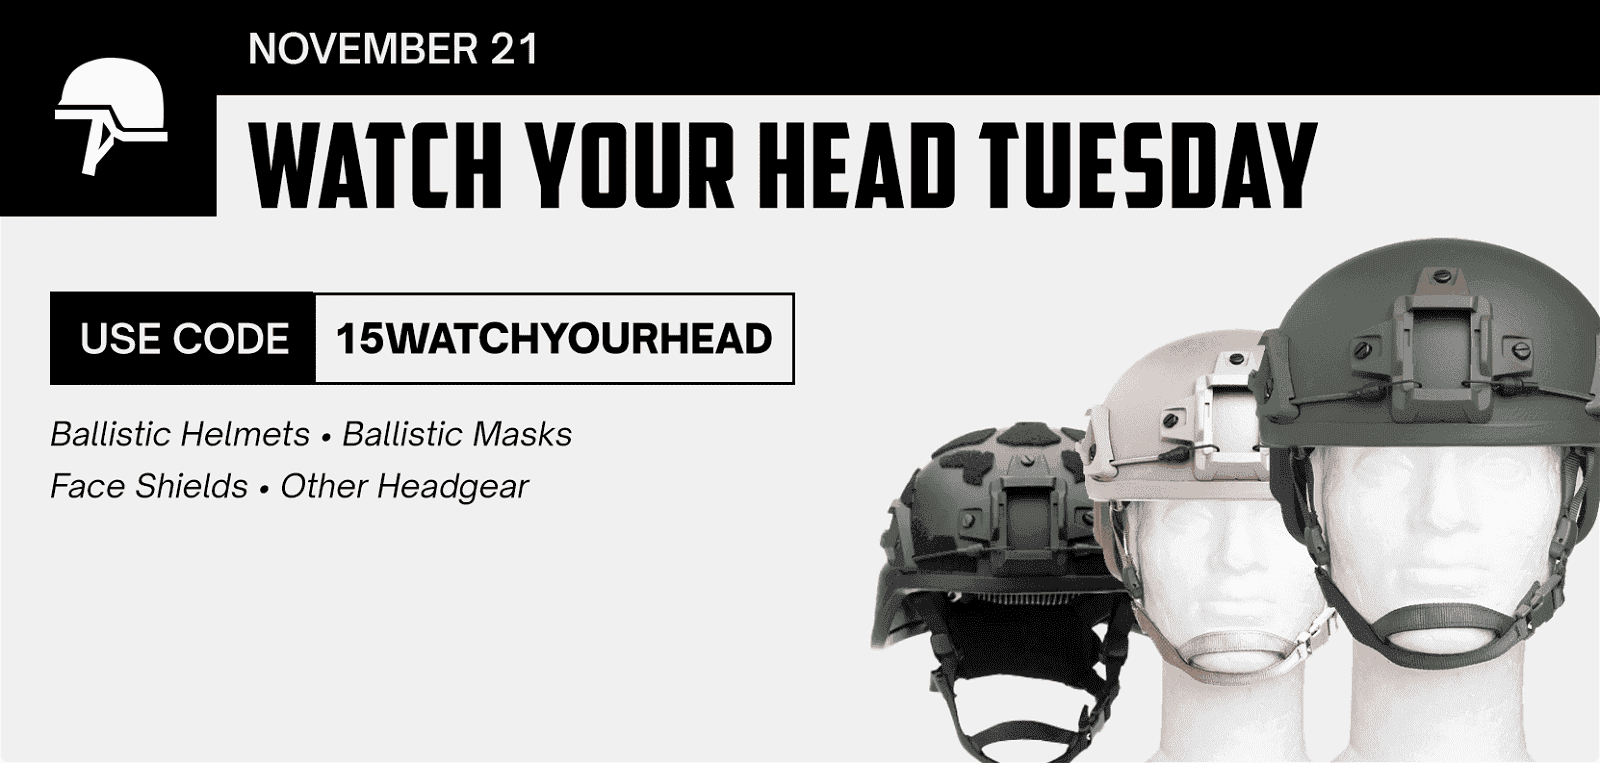 Watch Your Head Tuesday